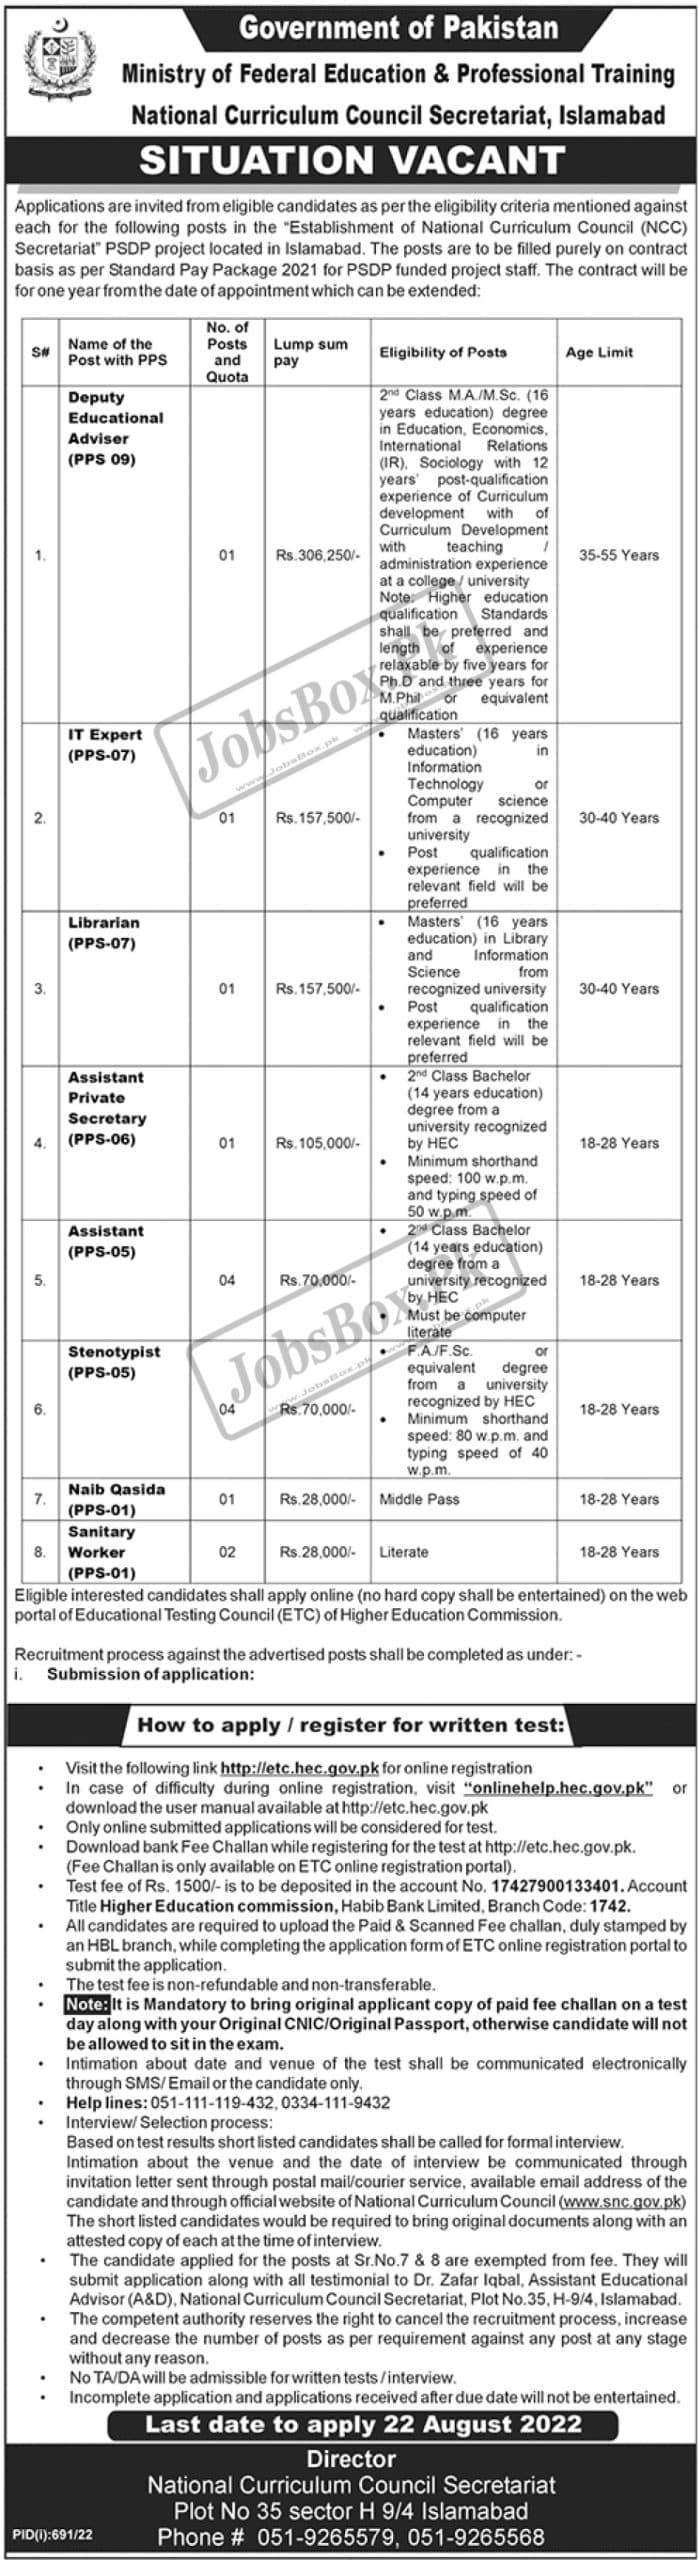 Ministry of Federal Education & Professional Training New Jobs 2022